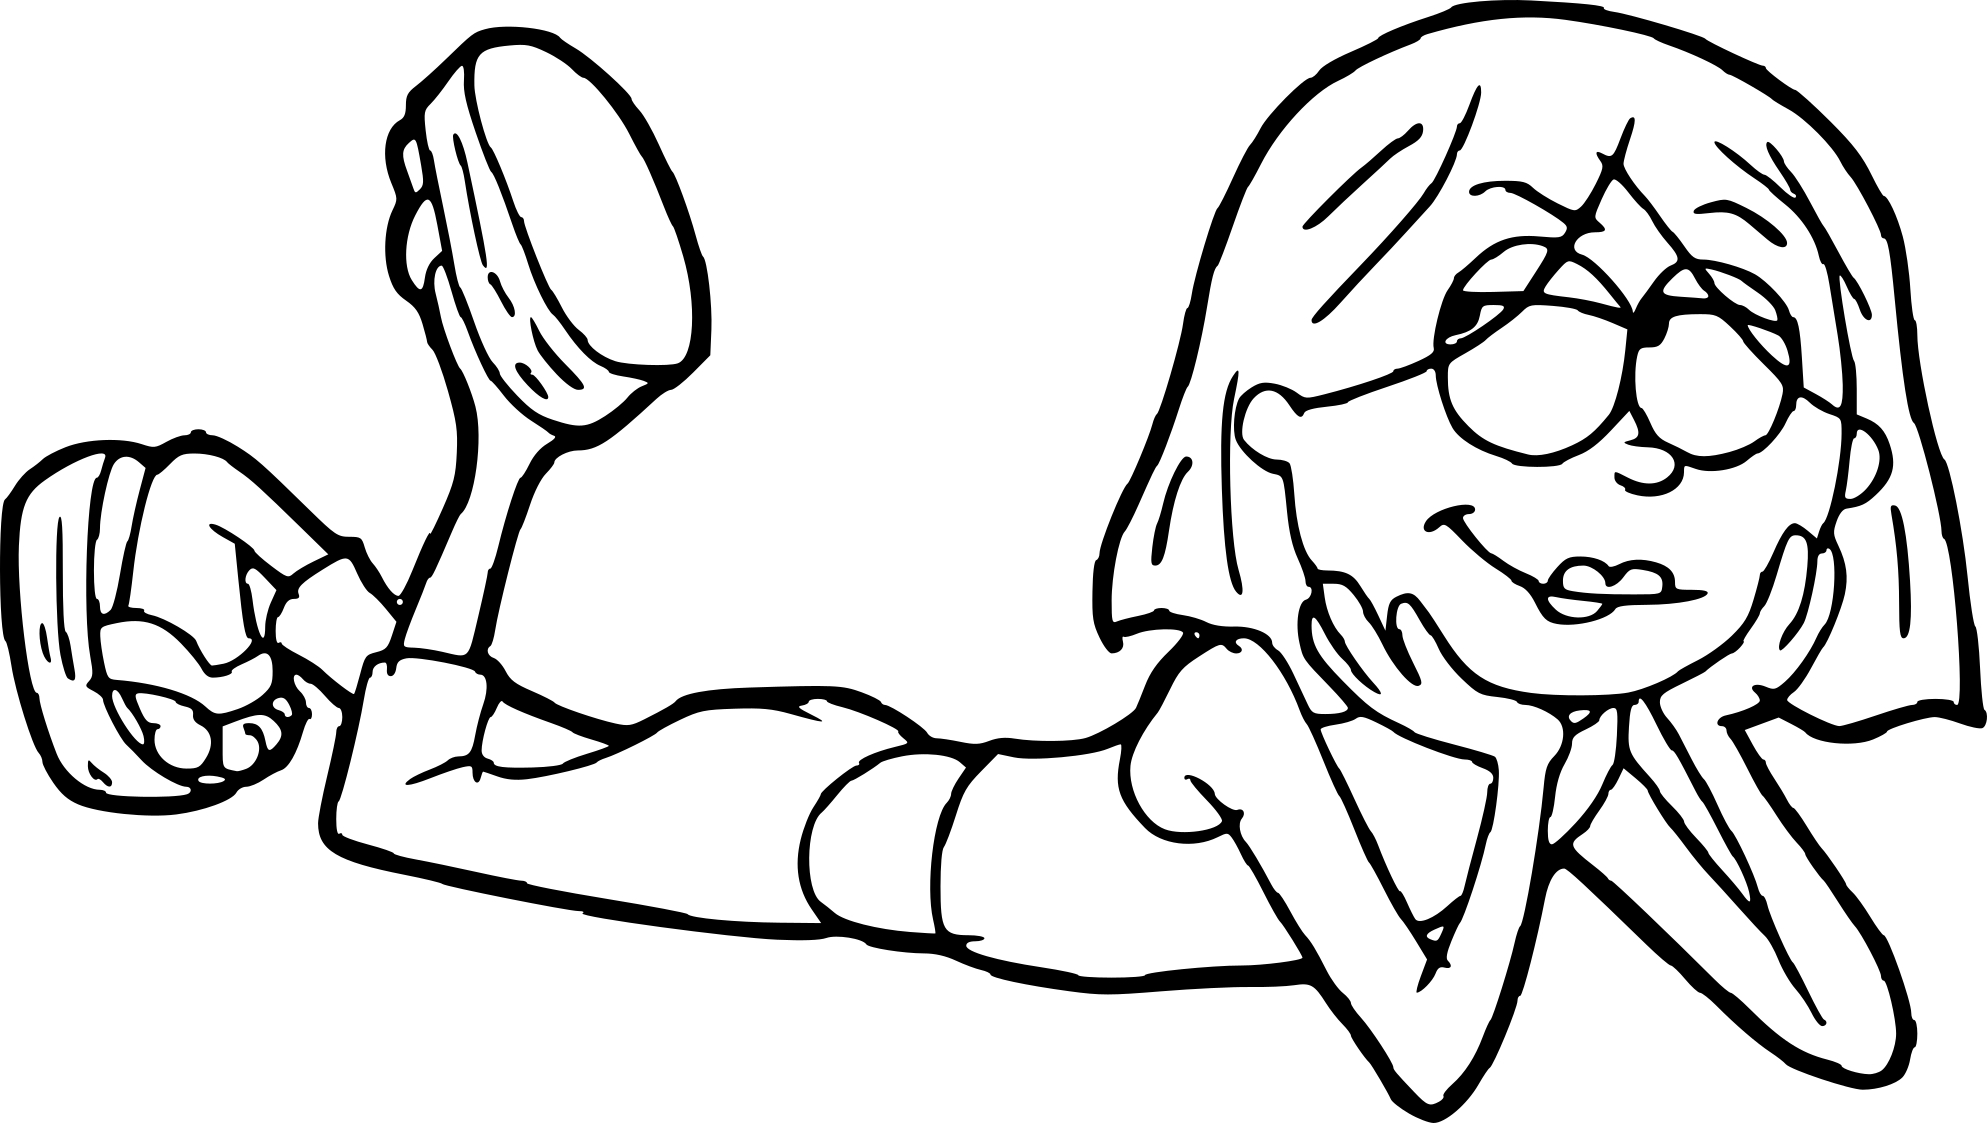 Lizzie Mcguire drawing and coloring page